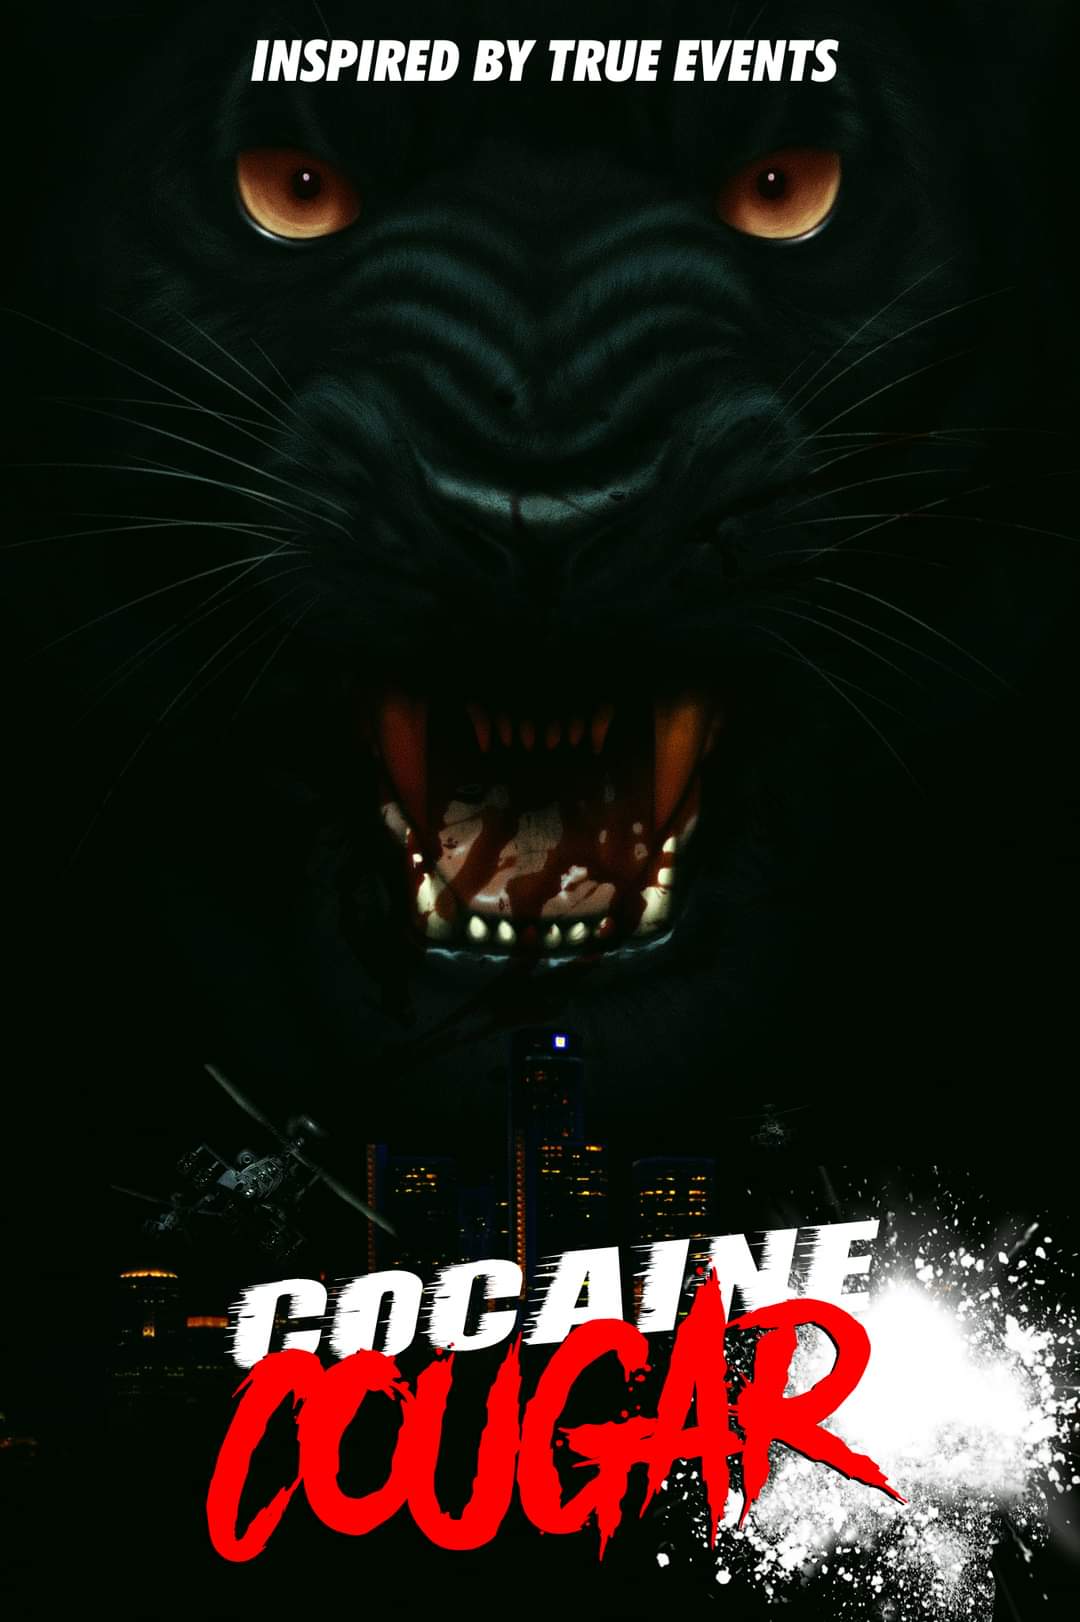 Cocaine Cougar Movie Review